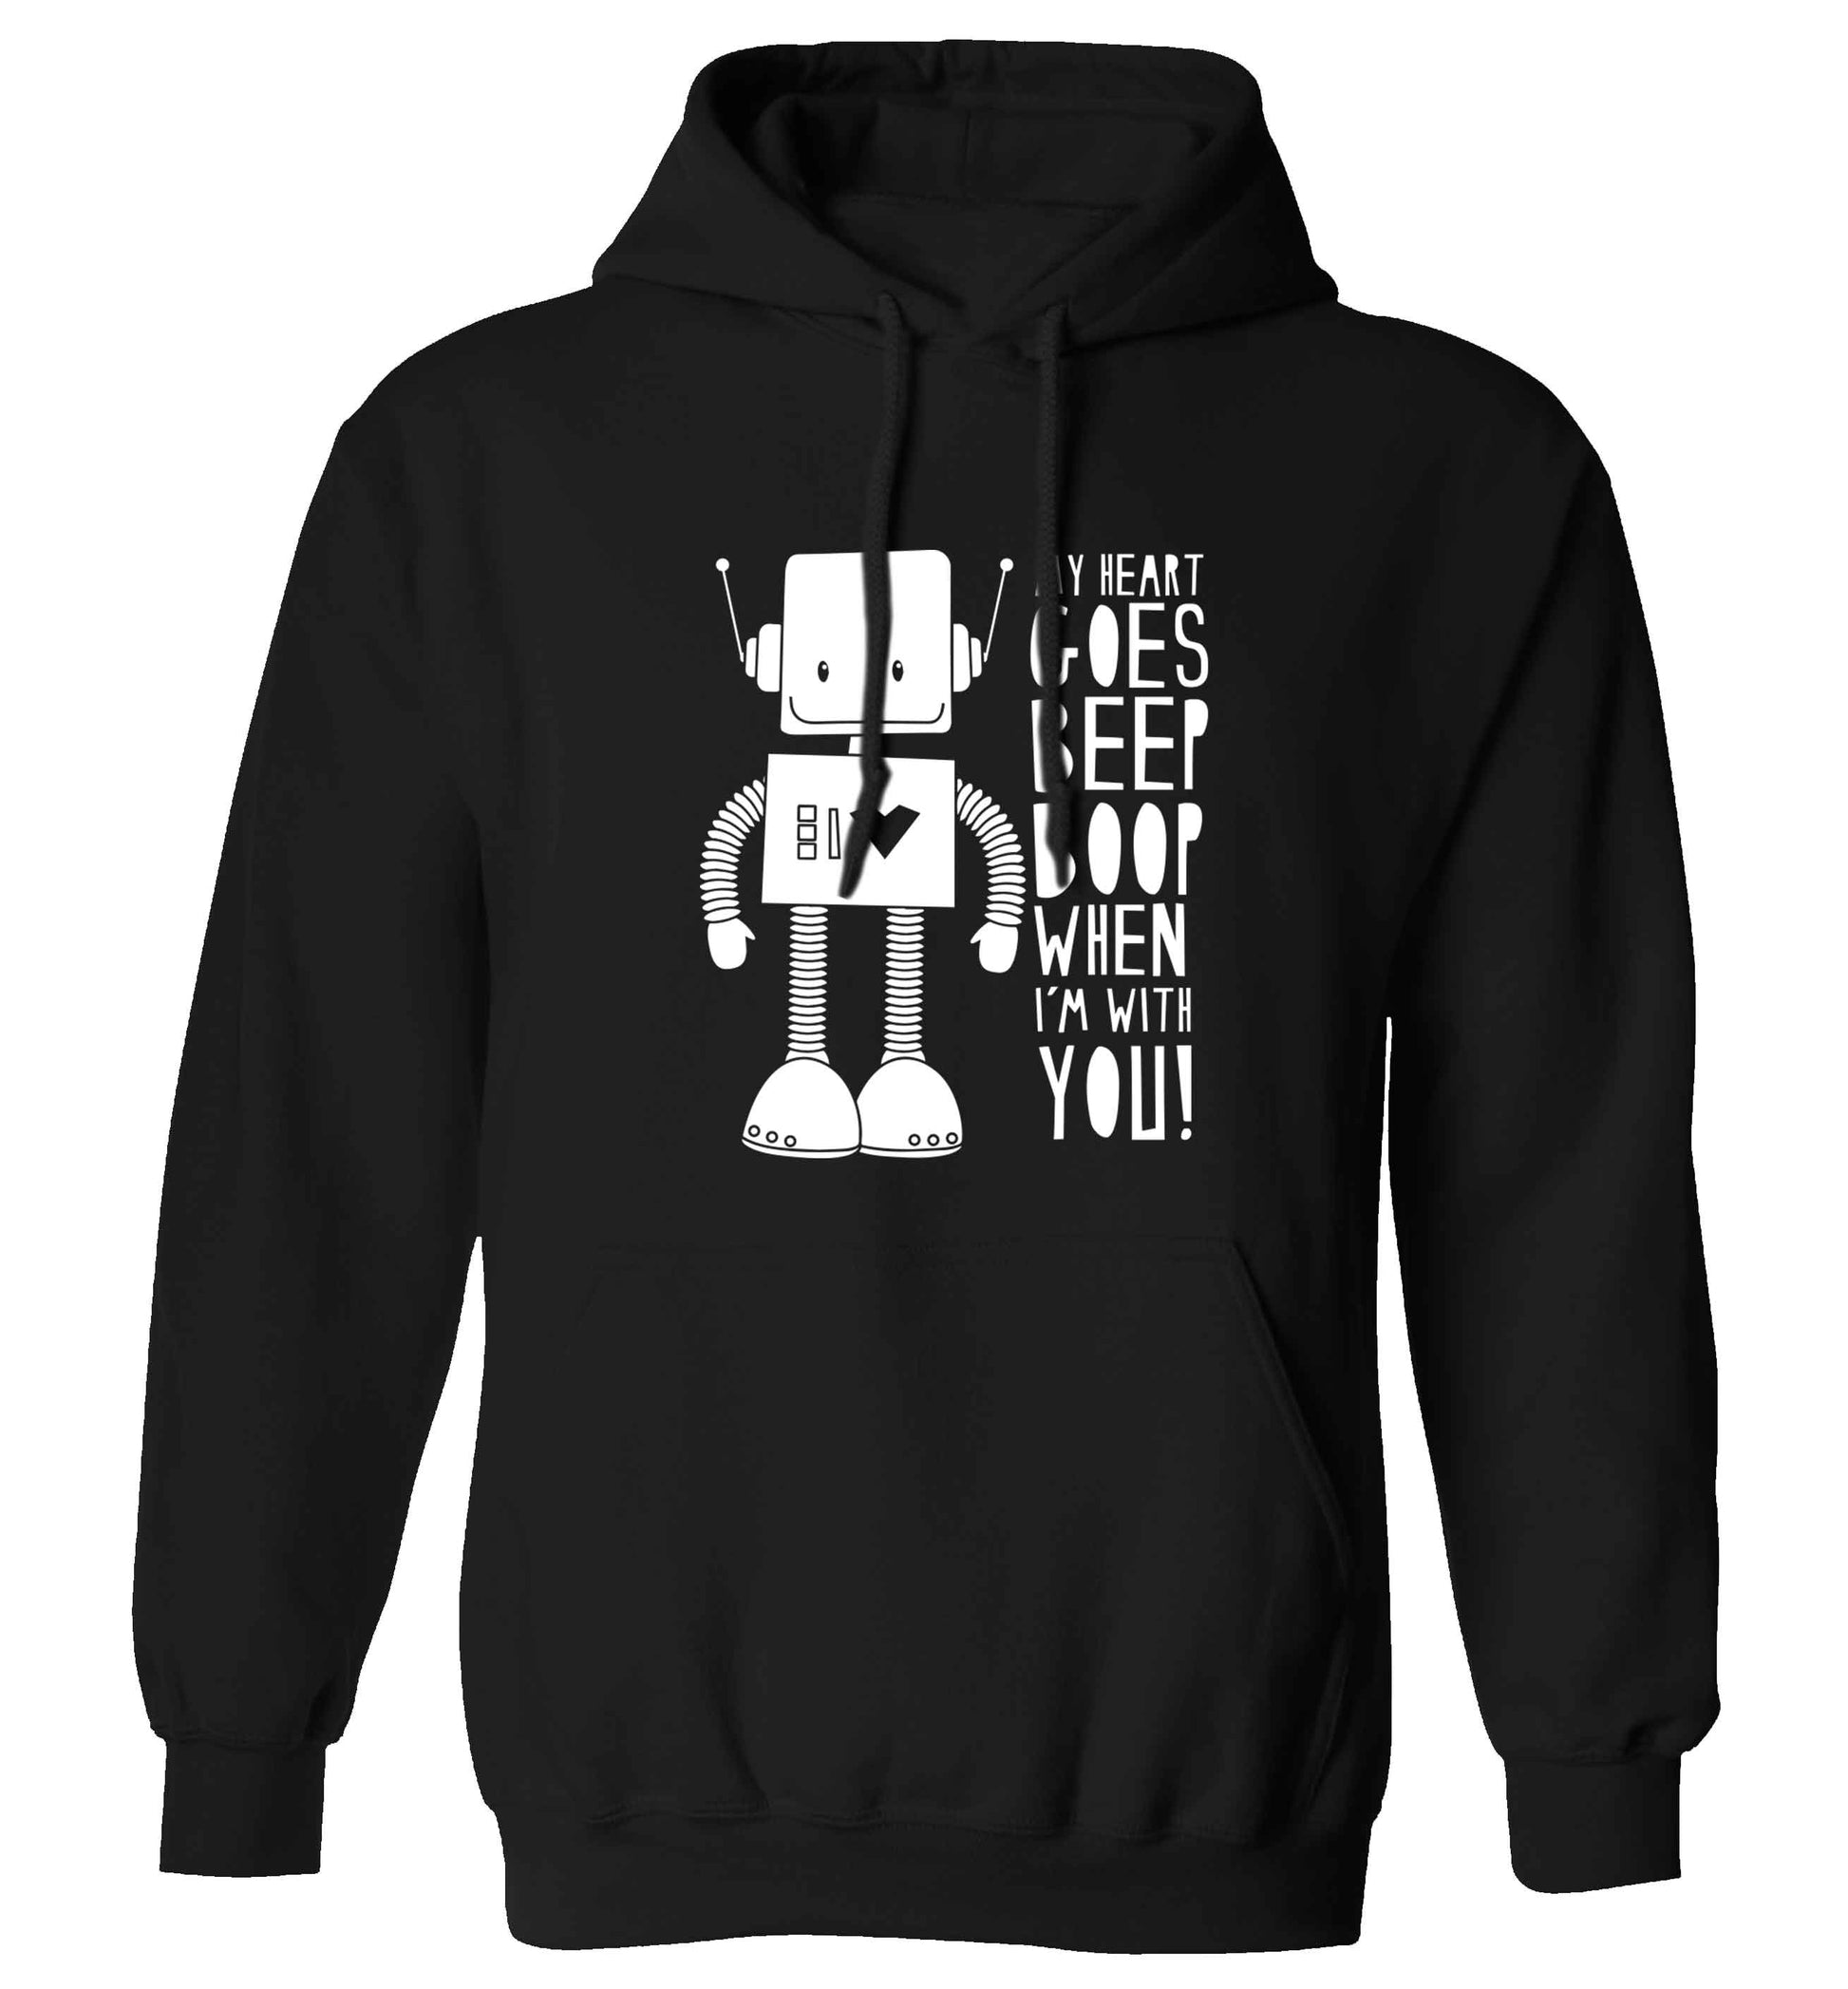 My heart goes beep boop when I'm with you adults unisex black hoodie 2XL